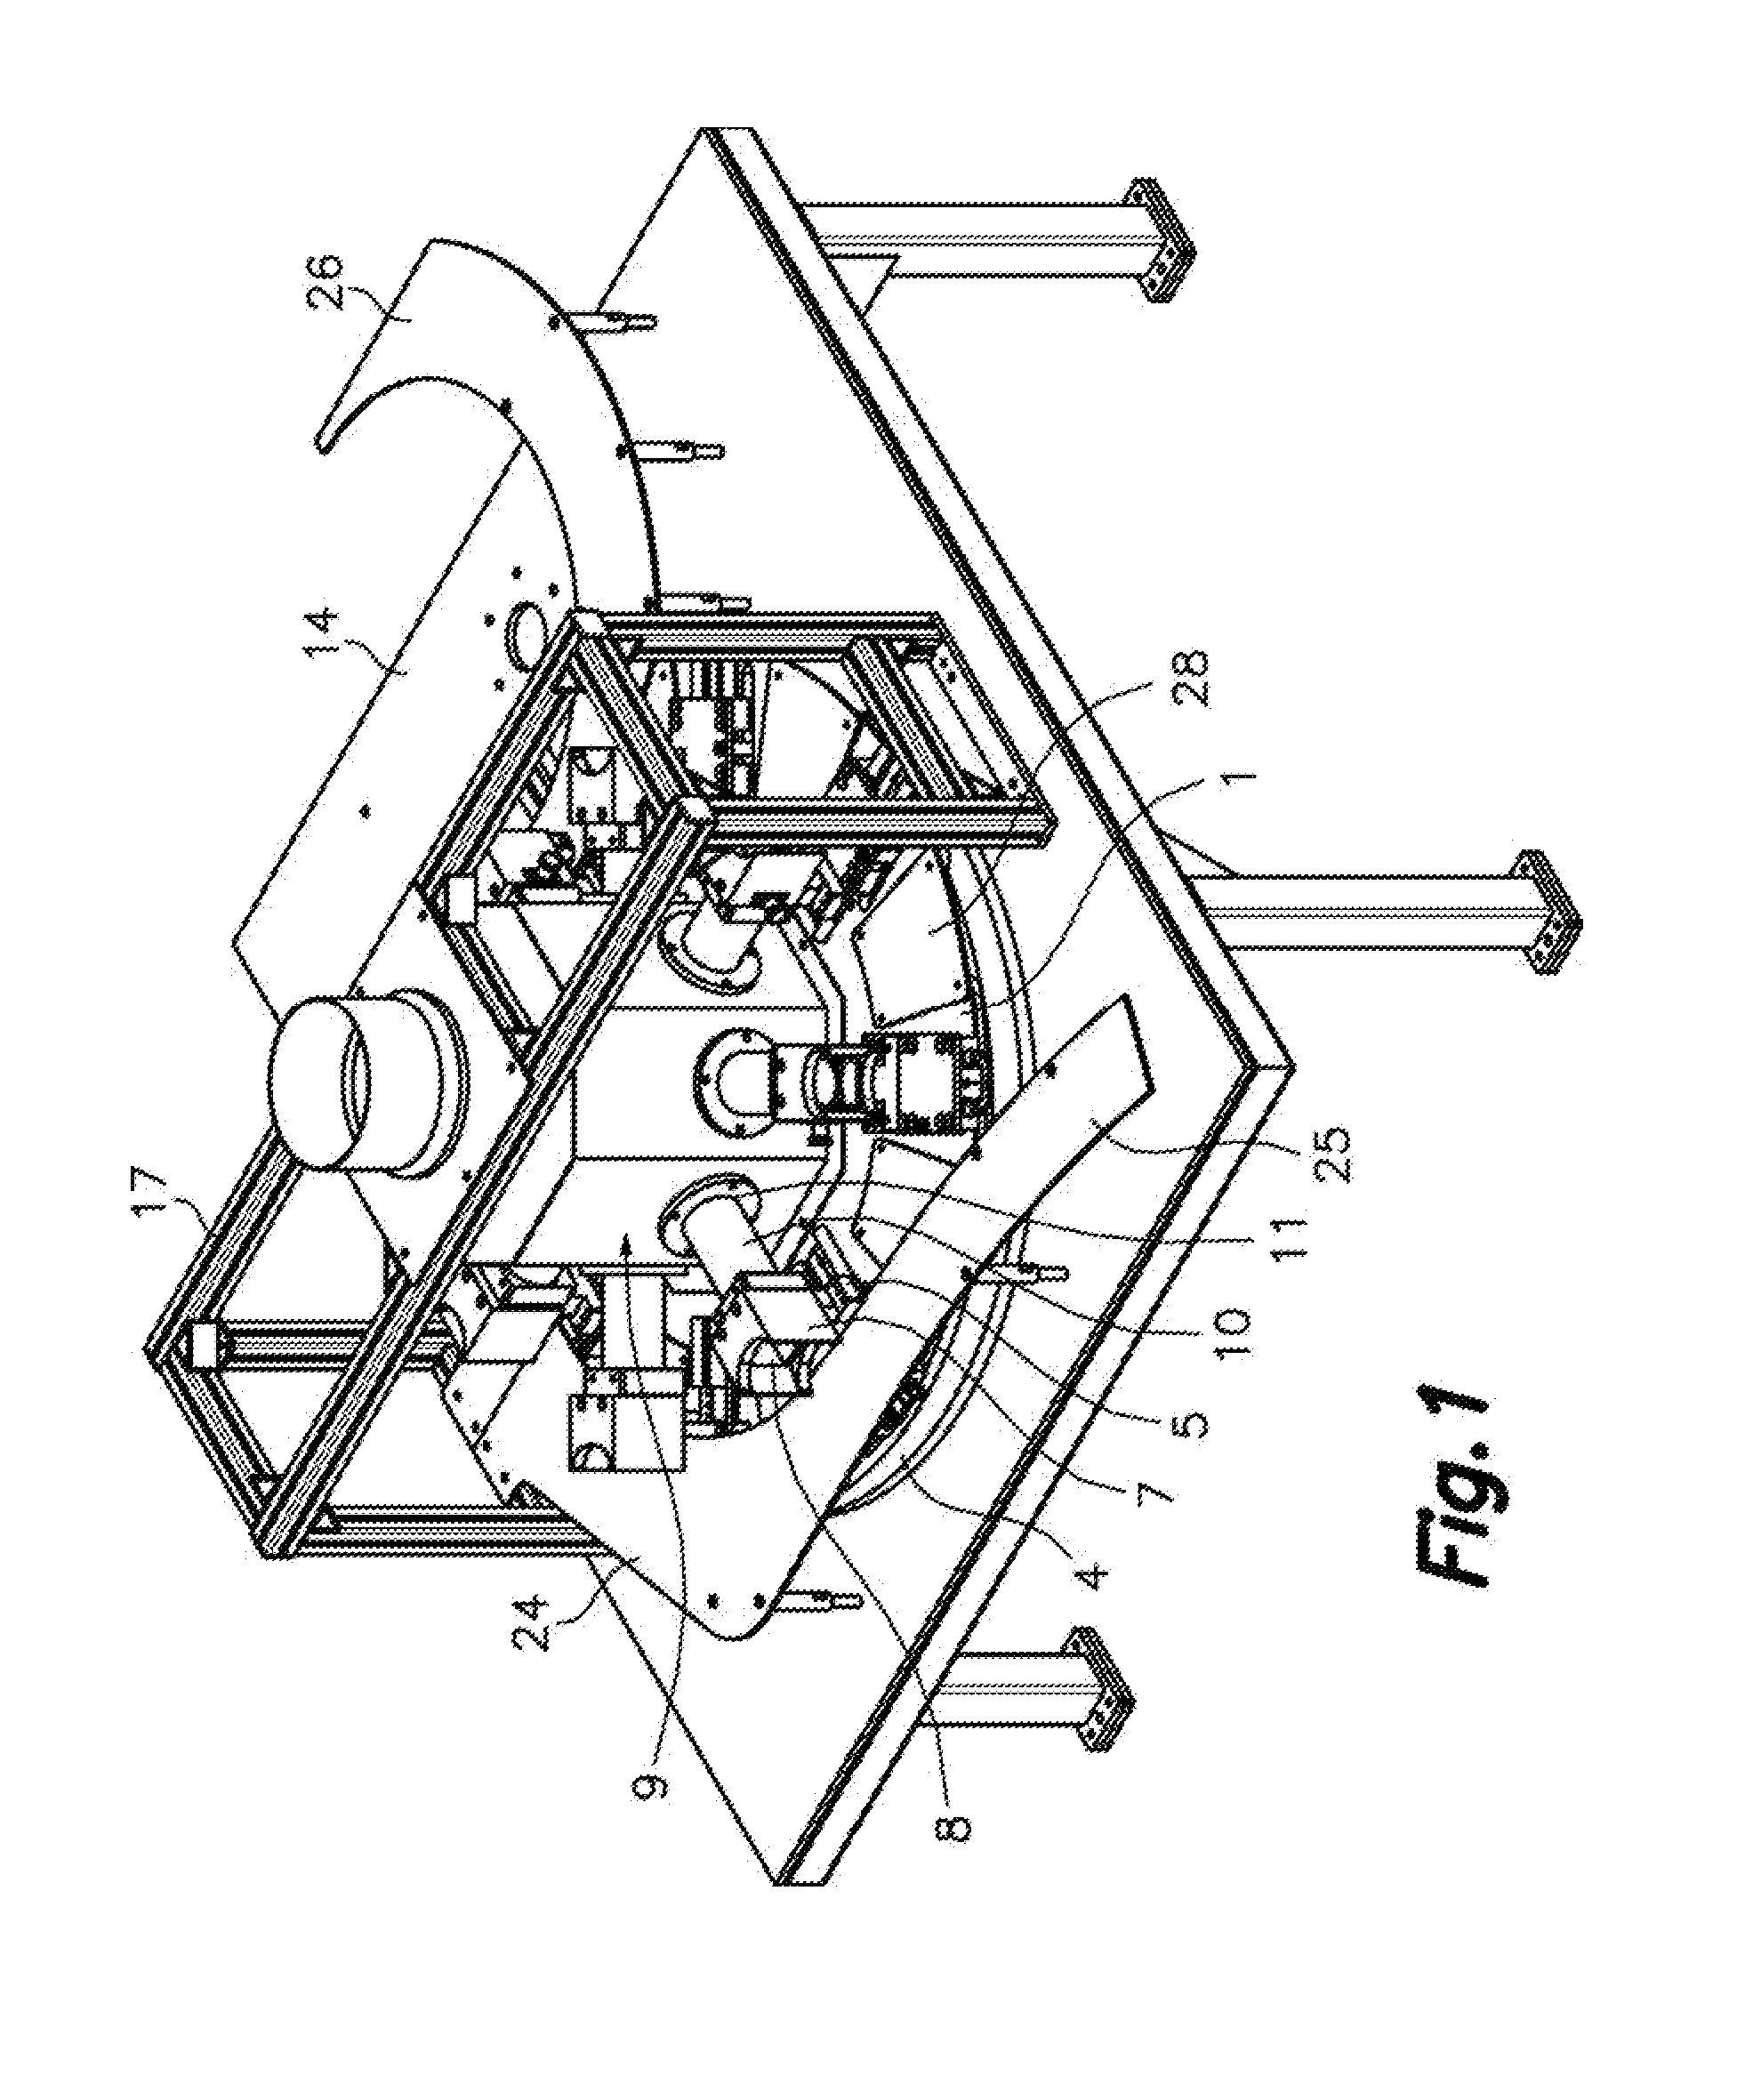 Rotary Conveyor with Change of Pitch for Transferring Containers